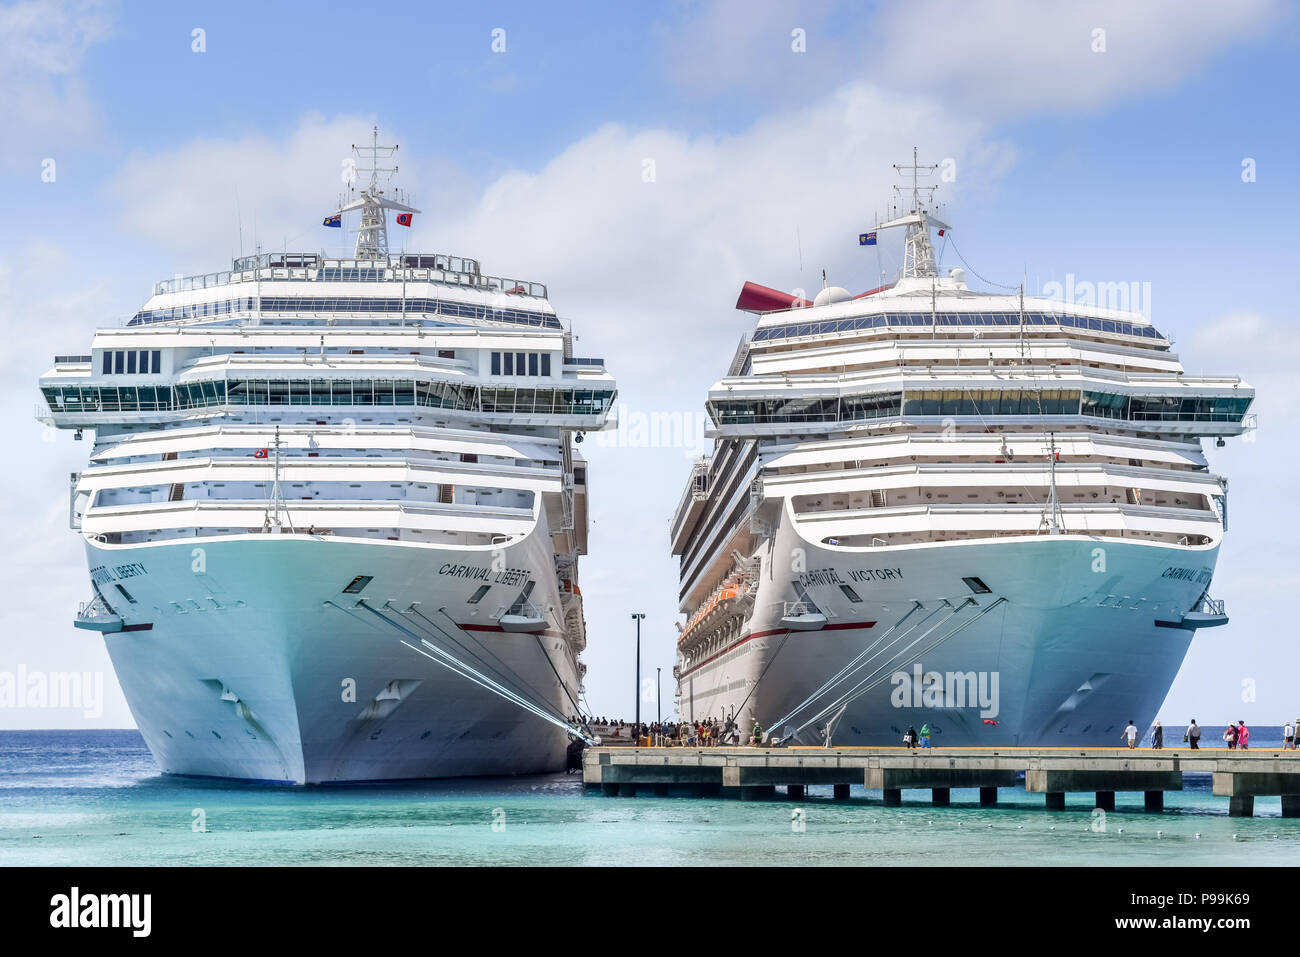 Grand Turk, Turks and Caicos Islands - April 03 2014: Carnival Liberty and Carnival Victory Cruise Ships docked side by side in Grand Turk. Stock Photo